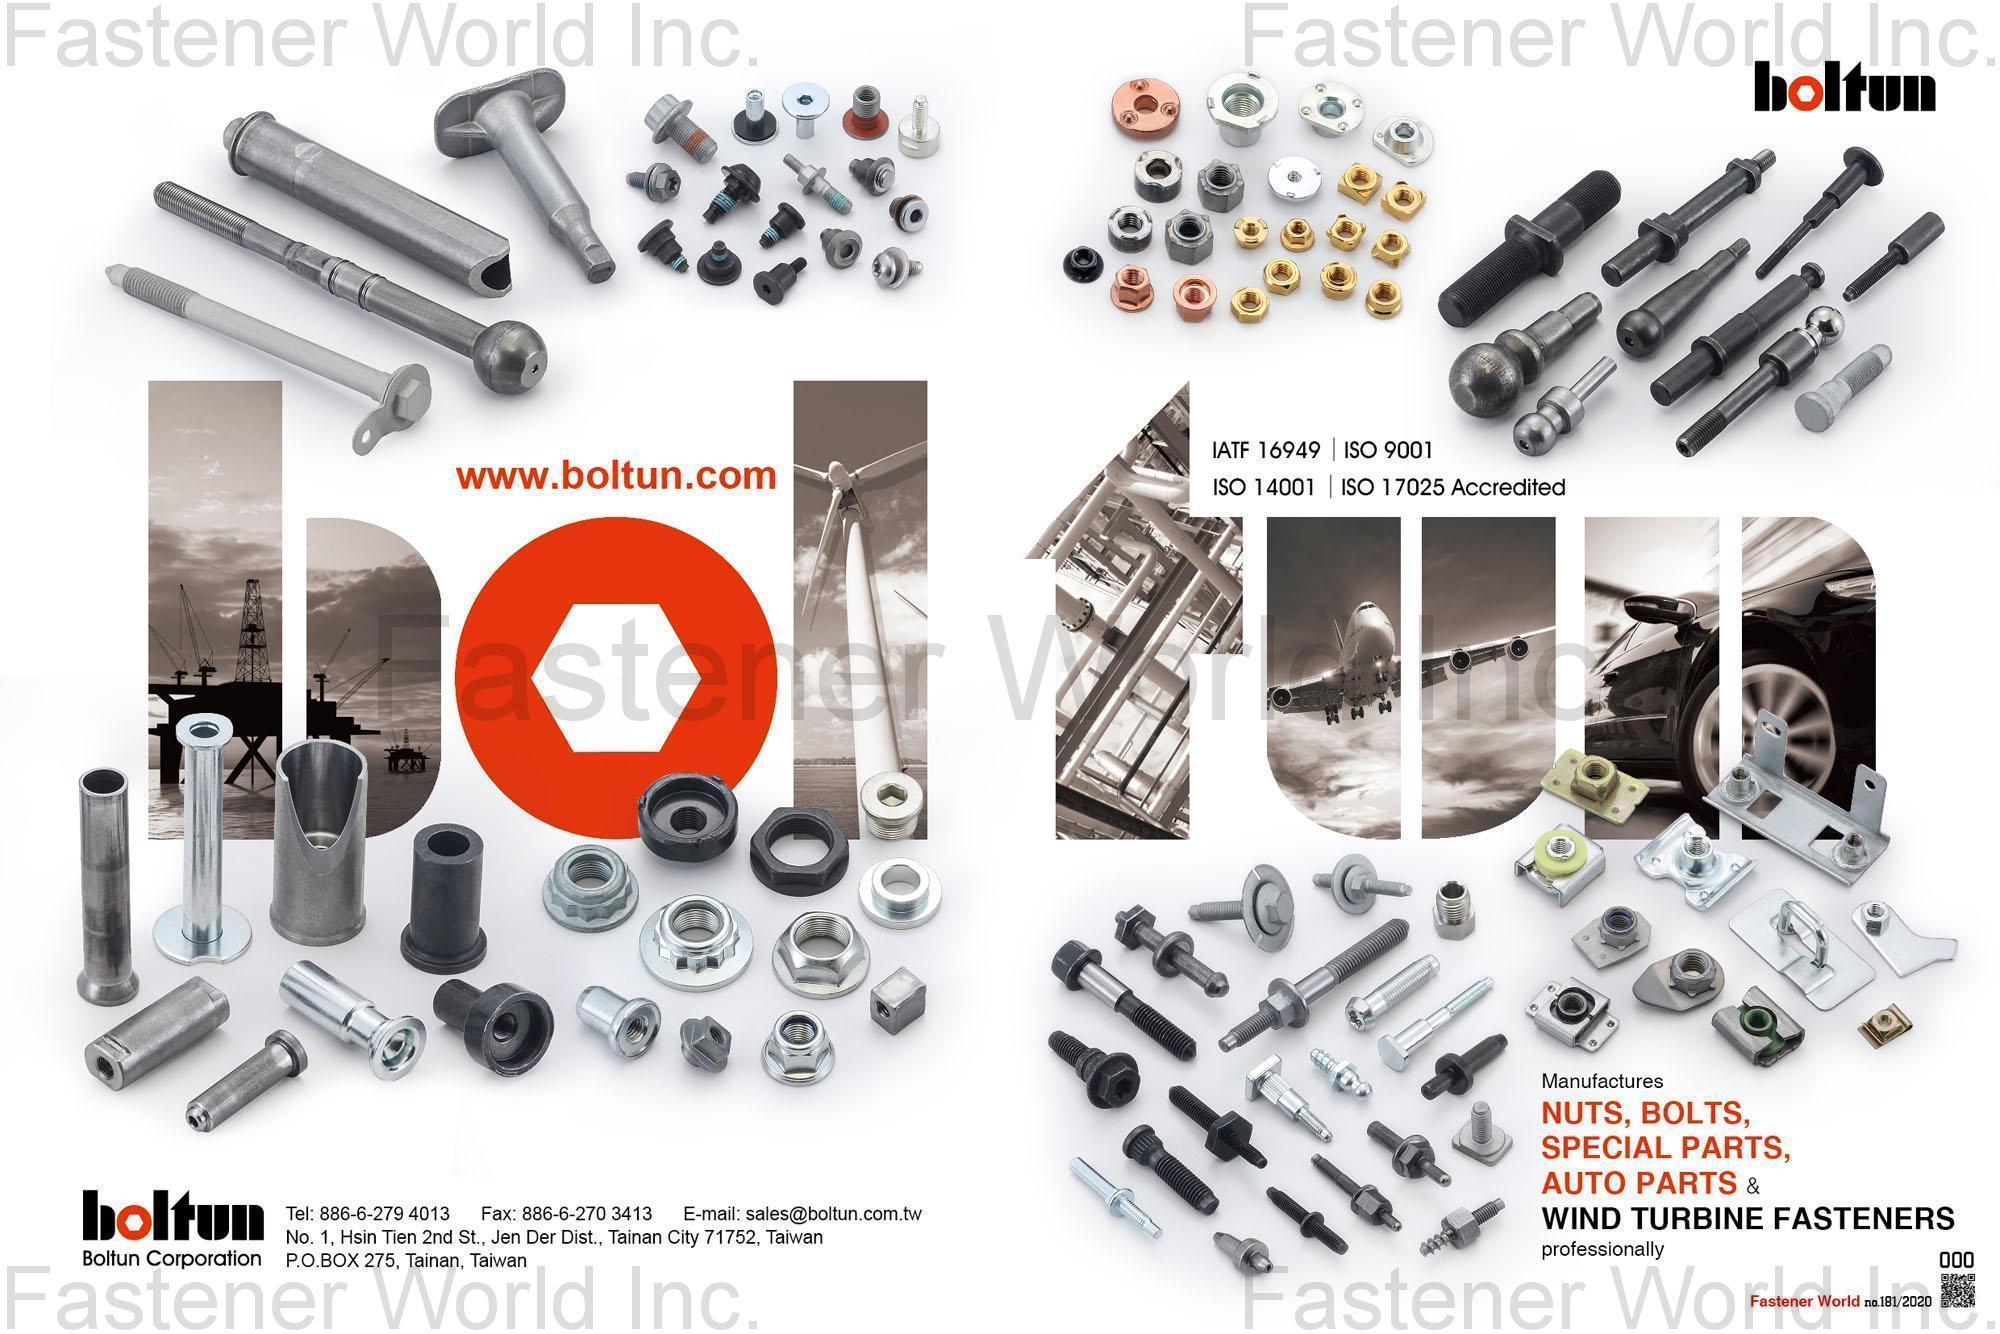 BOLTUN CORPORATION  , Welding Nuts,Rivet Nuts,Clinch Nuts,Locking Nuts,Nylon Insert Nuts,Conical Washer Nuts,T-Nuts,CNC Machining Parts,Stamping Parts,Bushed & Sleeves,Assembly Components,Special Parts,HEX. Bolt & Screw,Flange Bolt,Socket,Sems,Screw With Welding Projection,Screw With Welding Ring & Points,Clinch Bolt,T C Bolt,Special Pin,Wheel Bolt,Rail Bolt,Rail Bolts Construction Fasteners: Nuts, Screws & Washers,Wind Turbine Fasteners Kits: Nuts, Bolts & Washers Truck Wheel Bolts,Bolts & Nuts & Components,Motorcycle parts,Nylon rings & special washer,Expansion Bolt